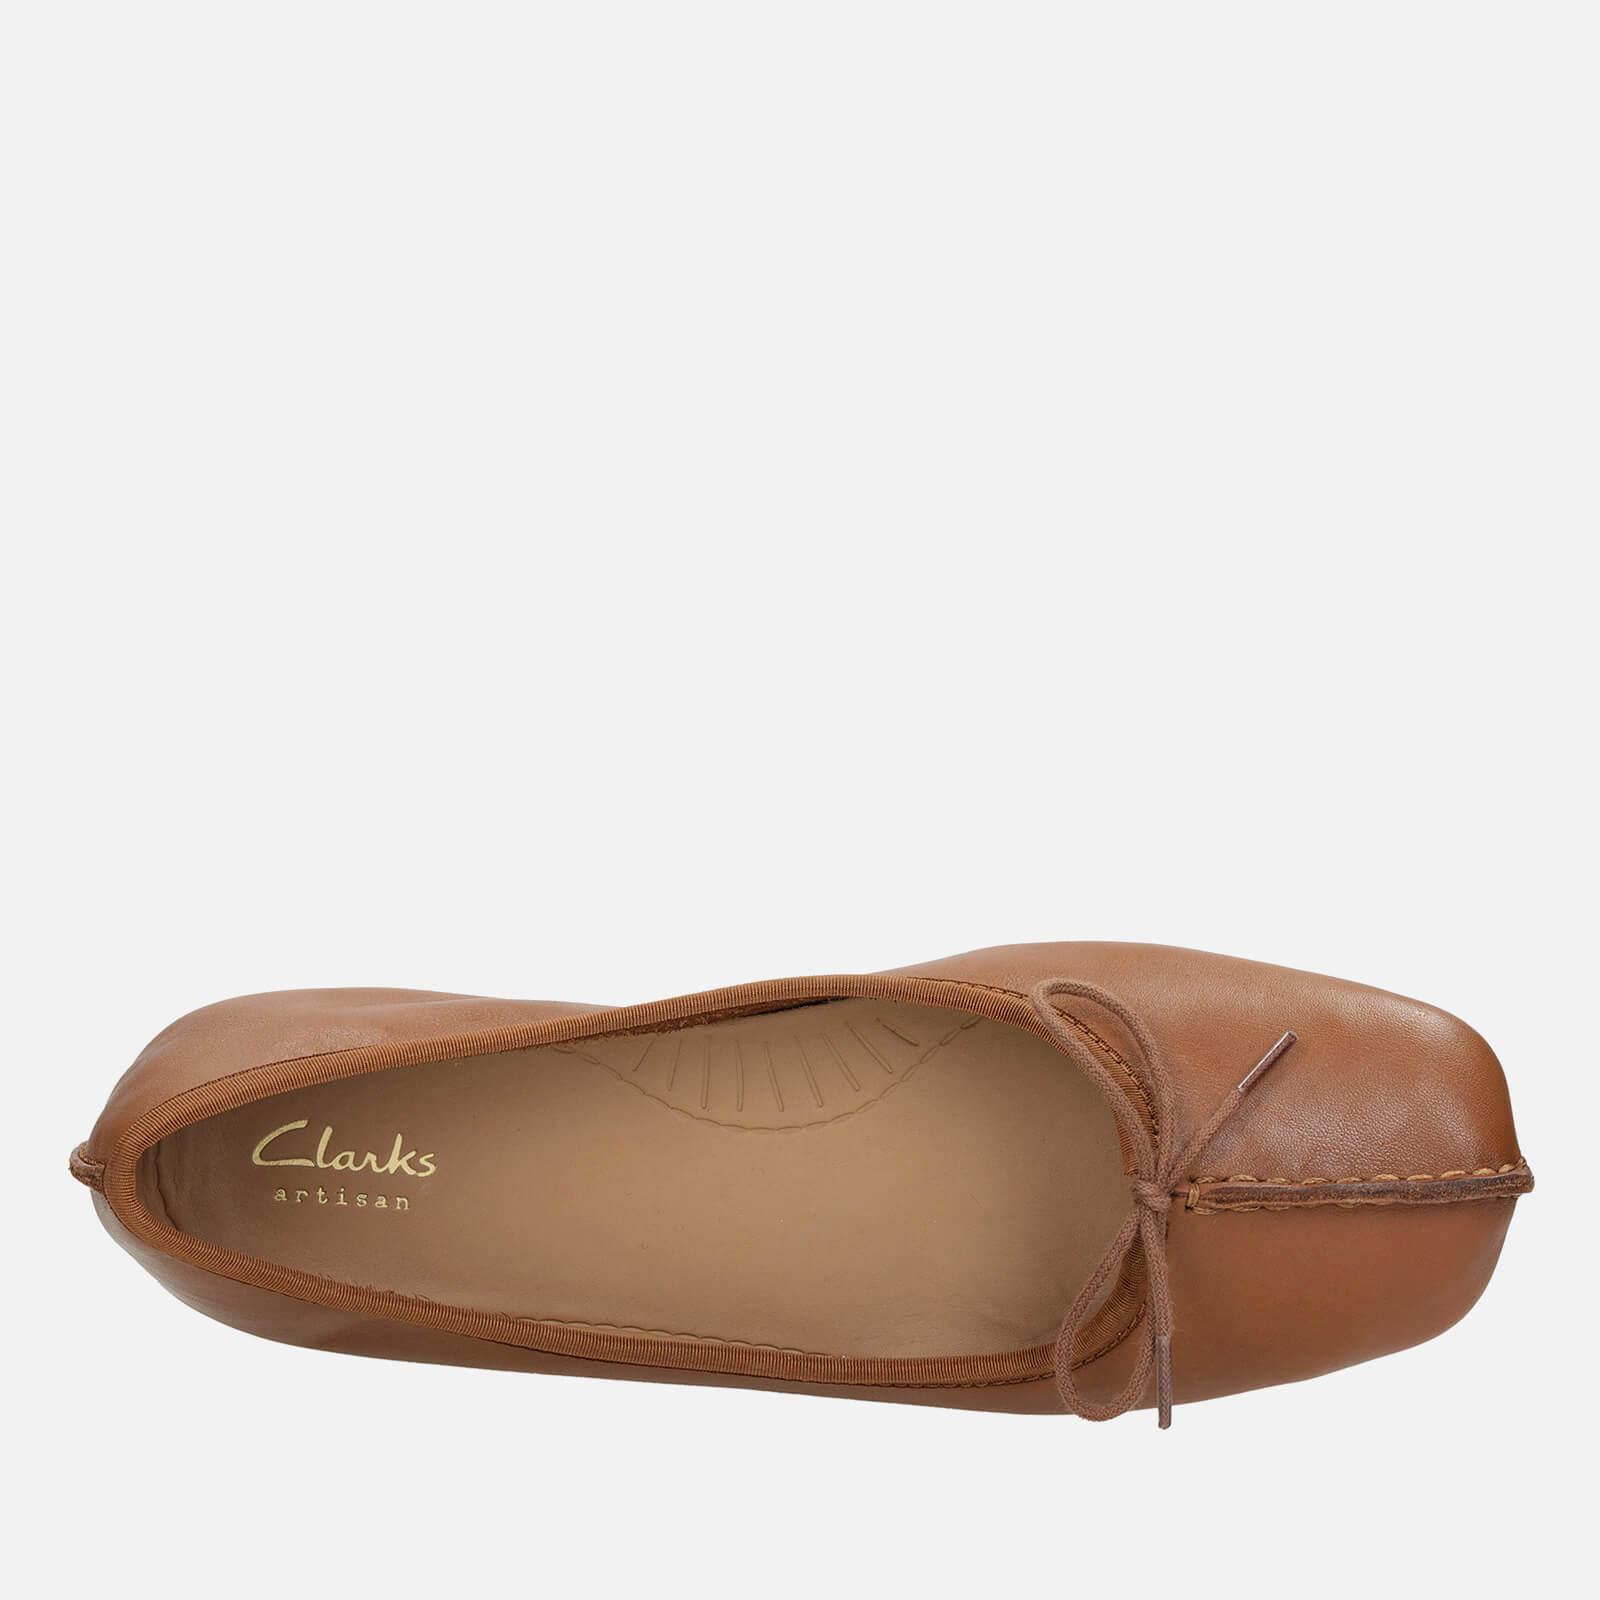 Clarks Freckle Ice Leather Ballet Flats in Brown | Lyst